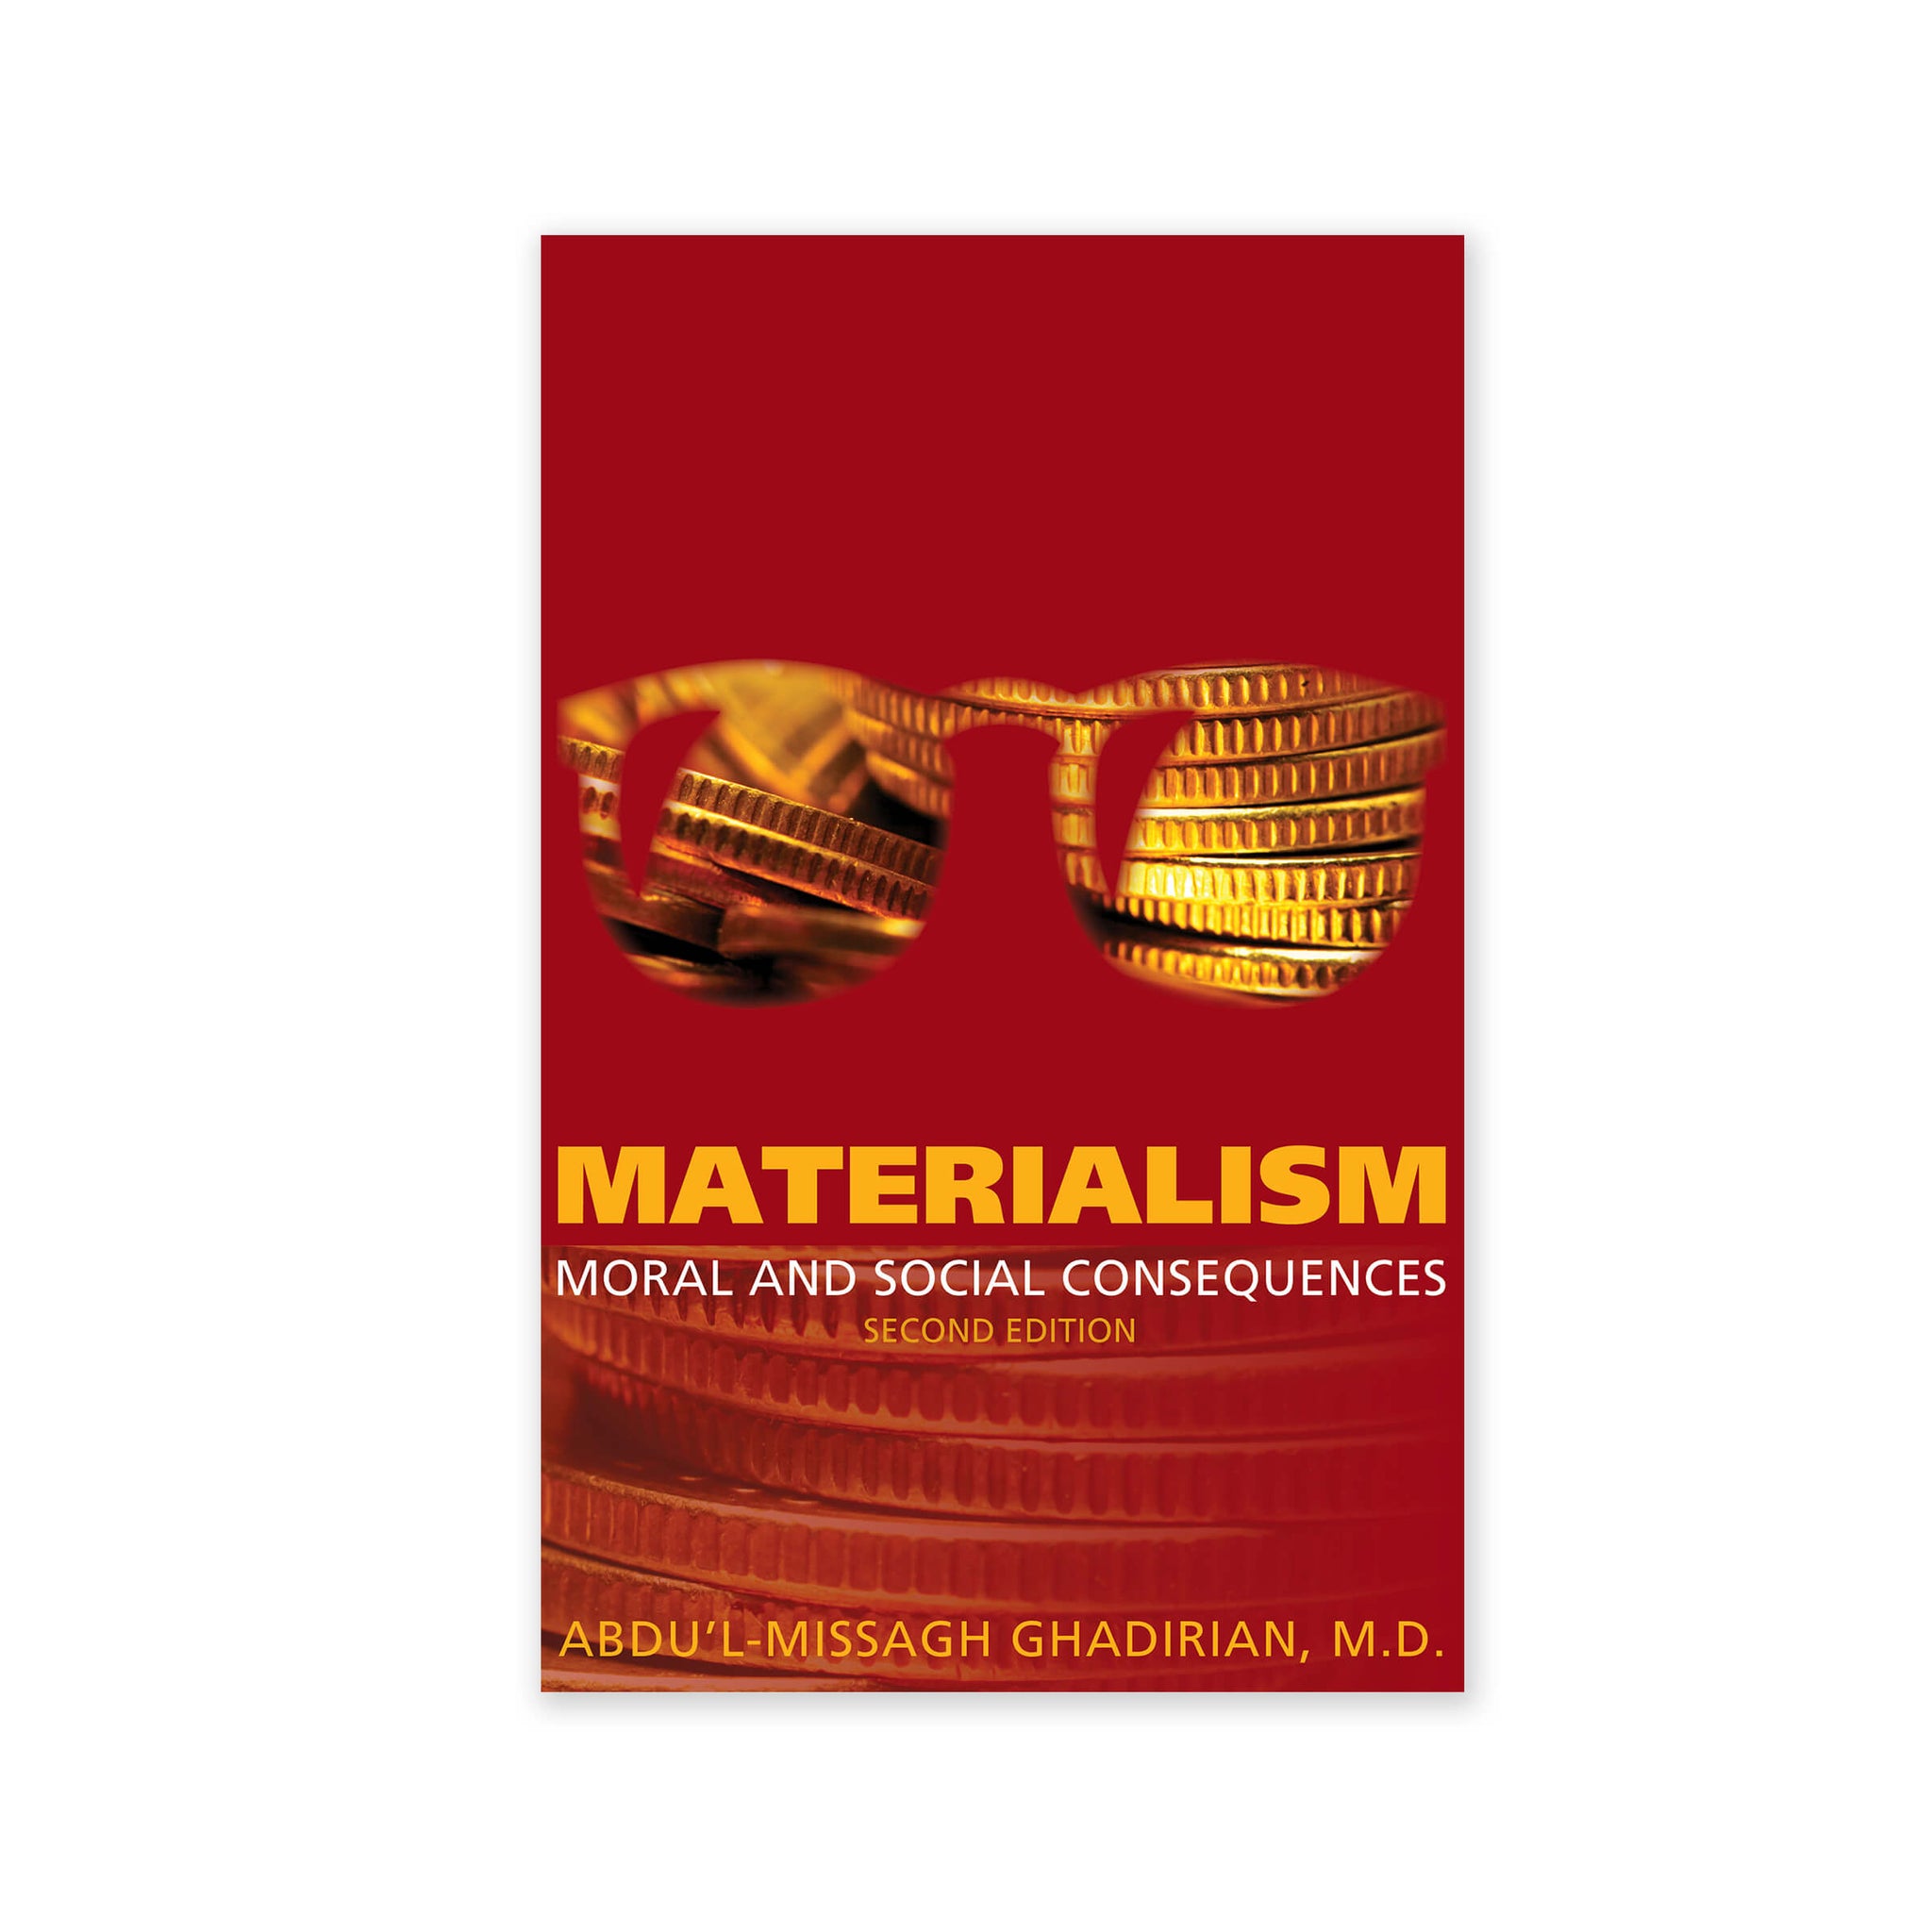 Materialism 2nd edition - Moral and Social Consequences